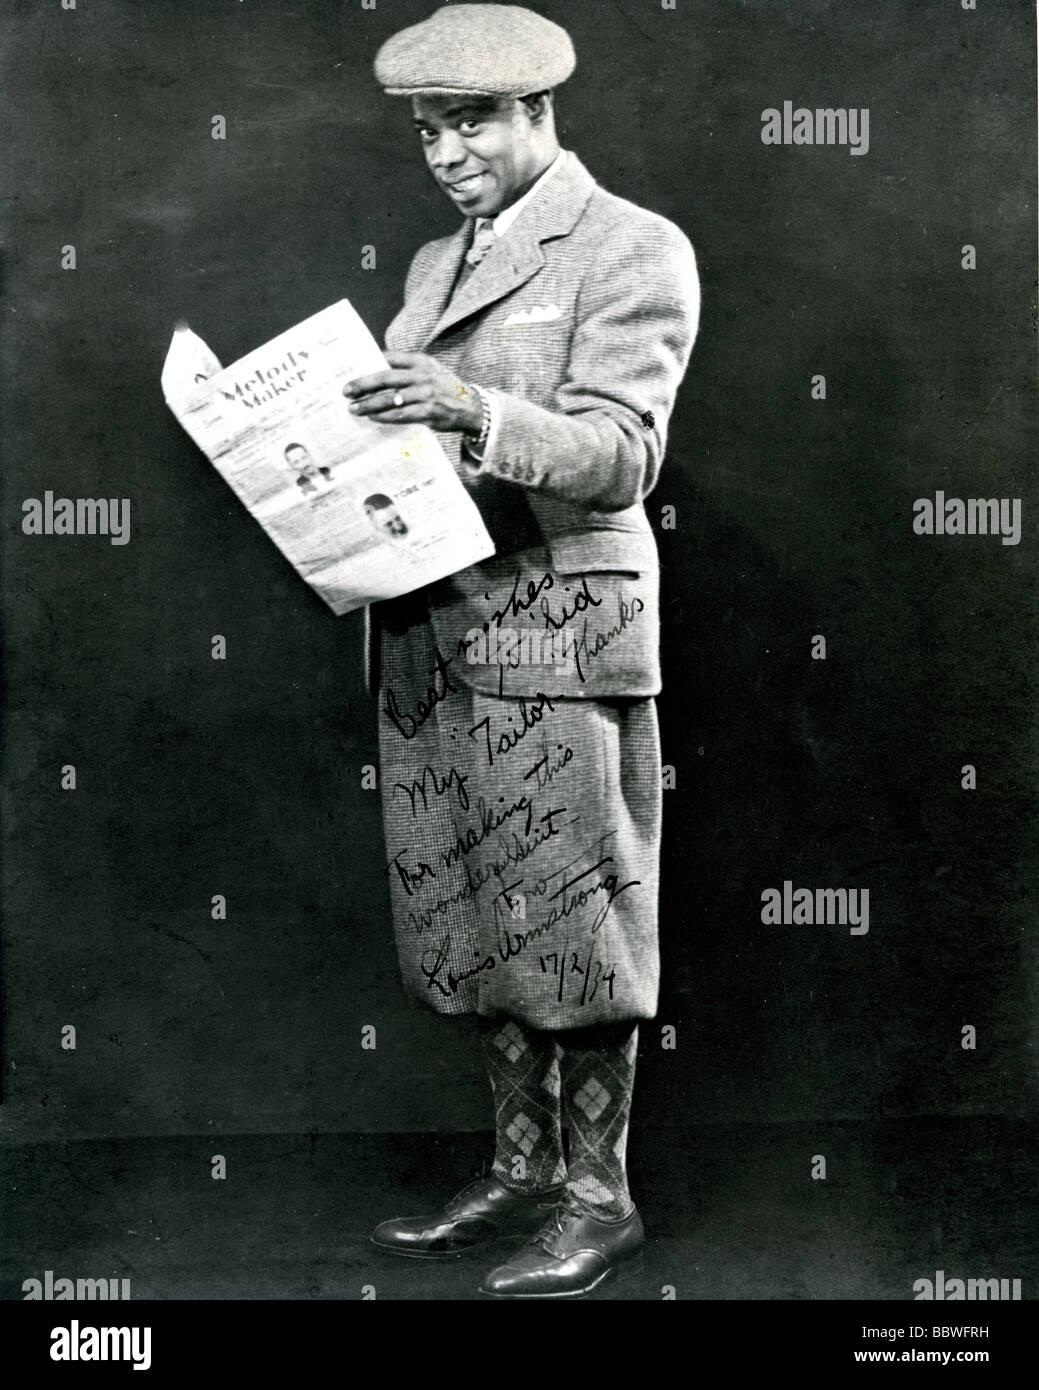 LOUIS ARMSTRONG - US jazz musician in 1934 after a visit to his London tailor to whom he gave this signed photo. Stock Photo